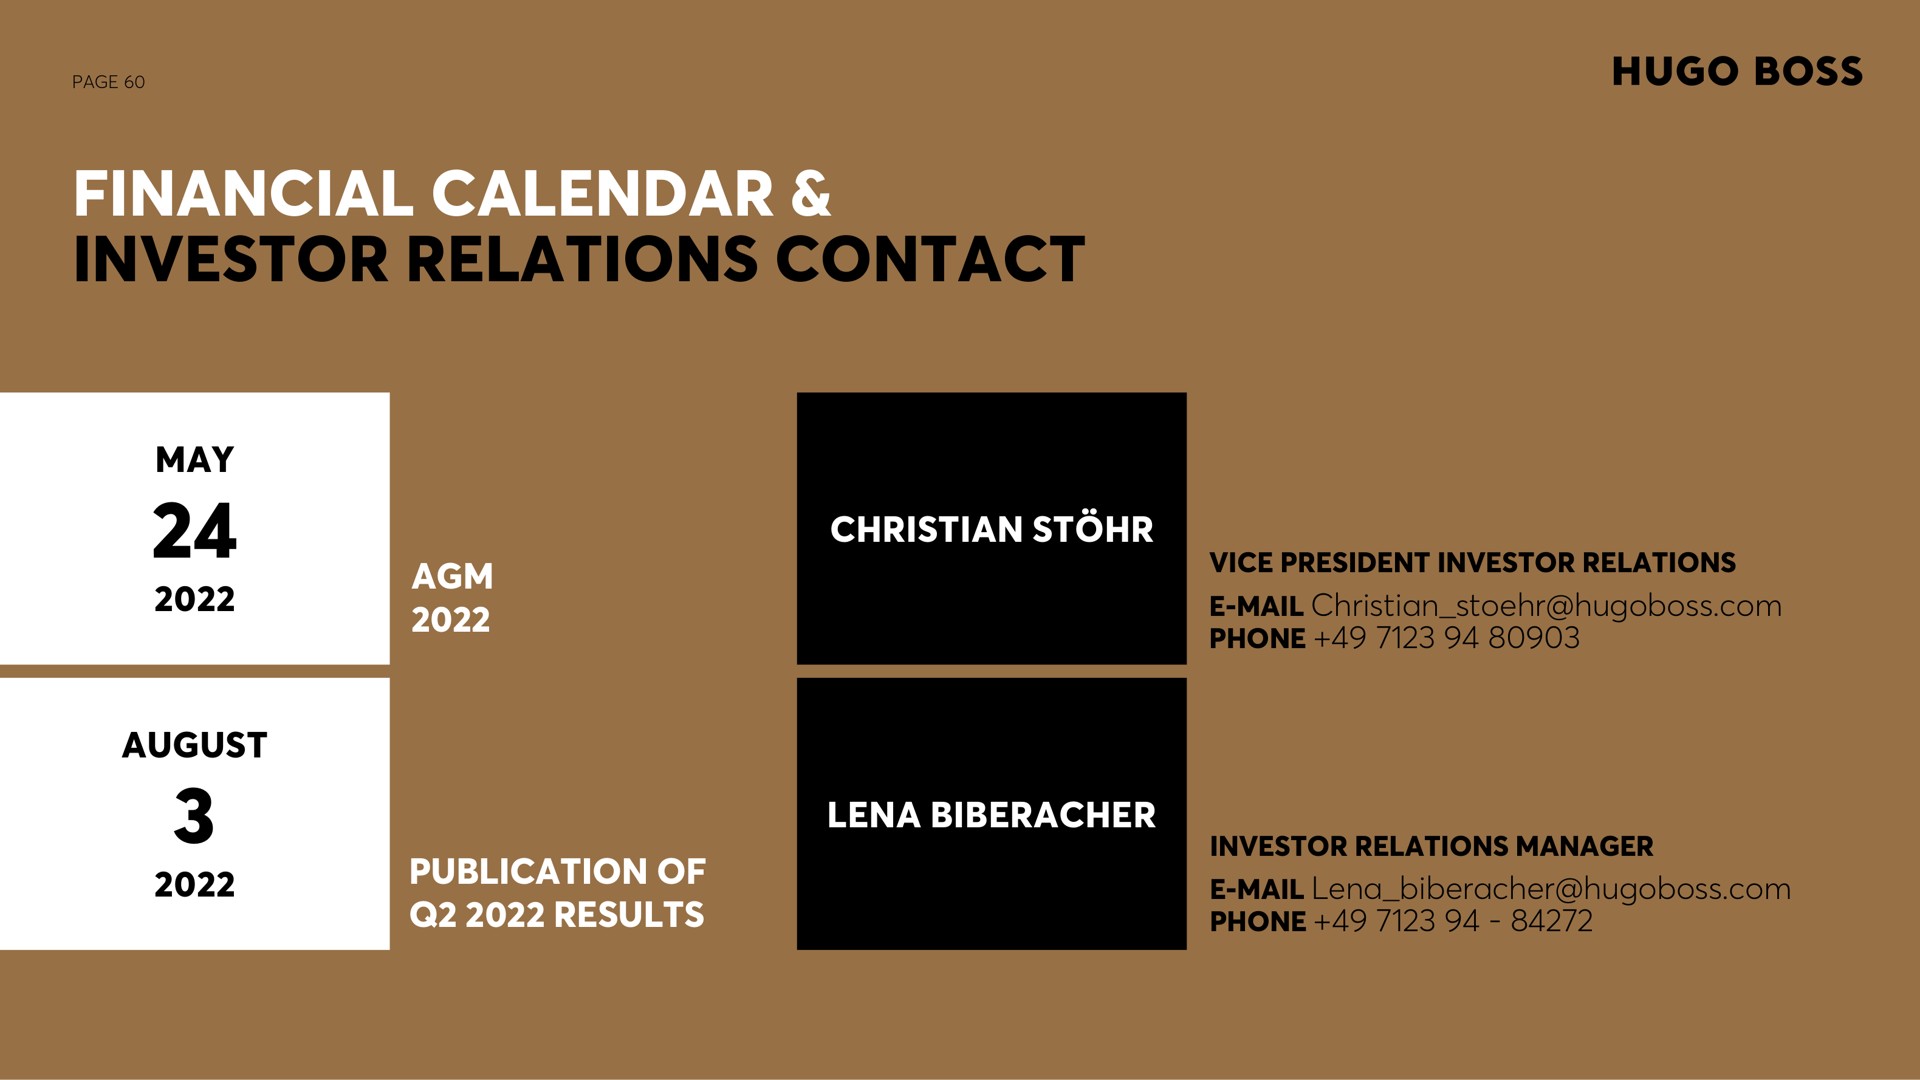 page financial calendar investor relations contact may august vice president investor relations mail phone publication of results investor relations manager mail phone | Hugo Boss